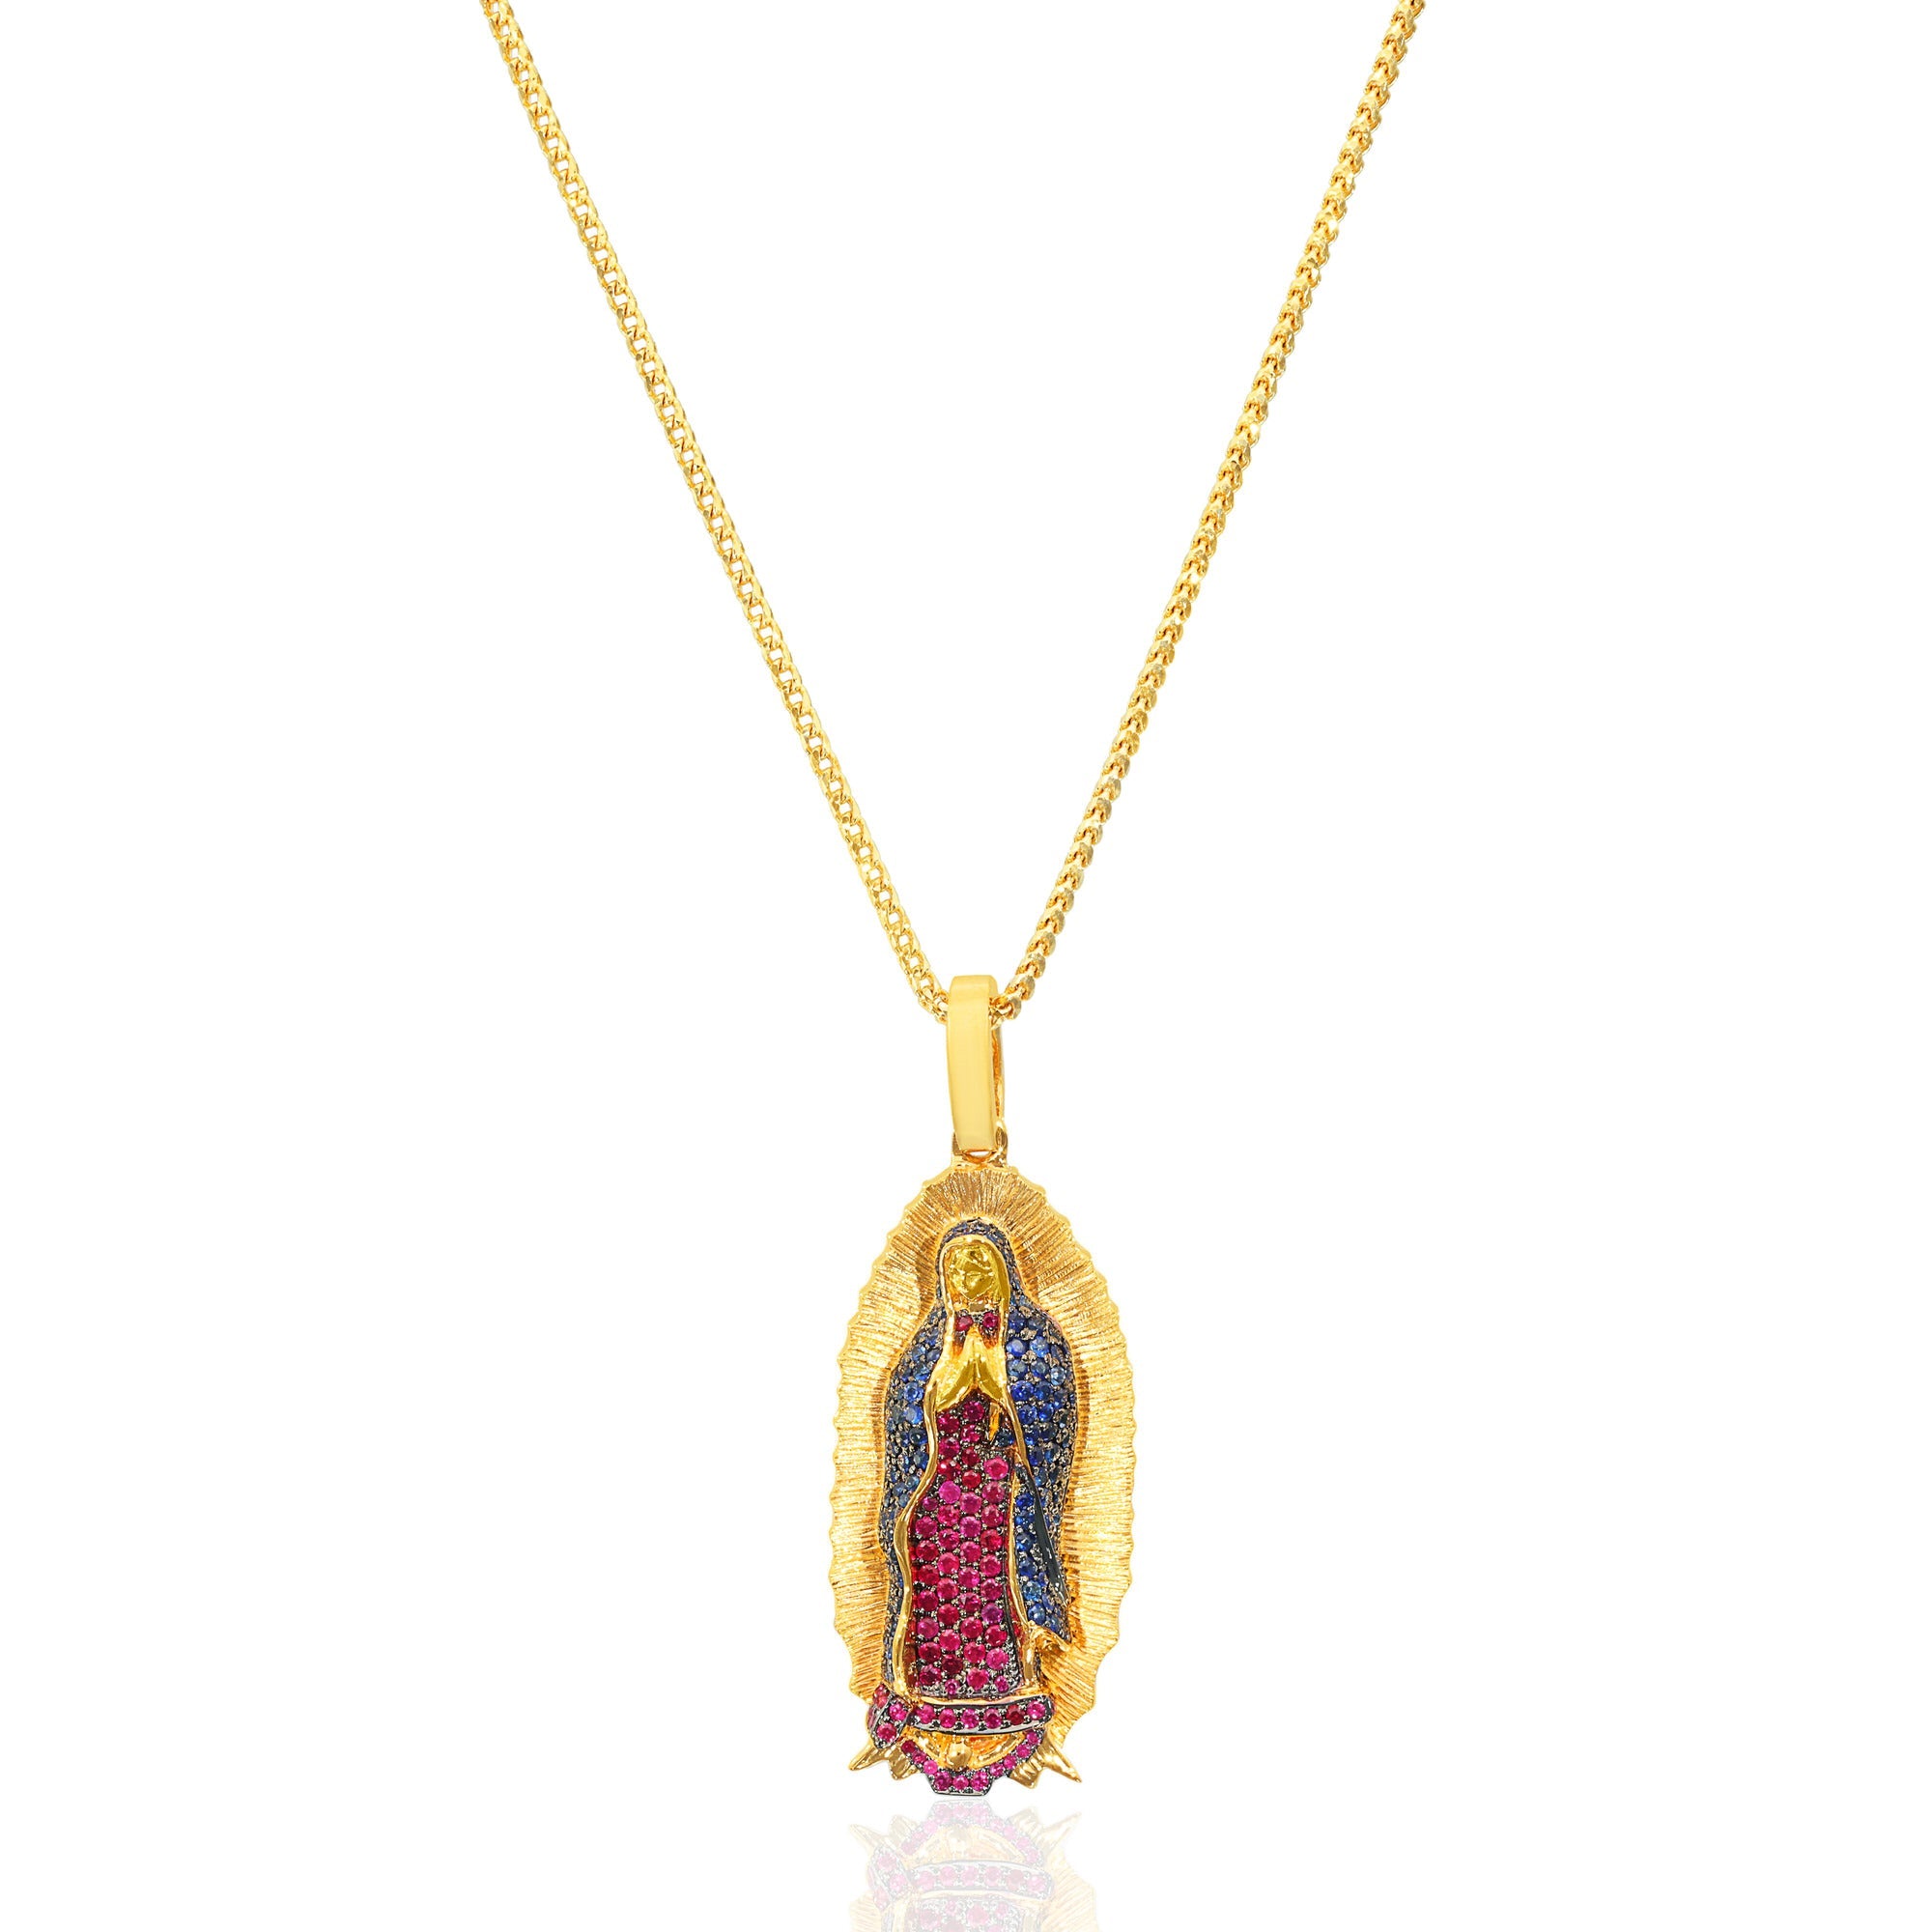 Micro Lady of Guadalupe Piece (Partially Iced, Mosaic) (14K YELLOW GOLD) - IF & Co. Custom Jewelers